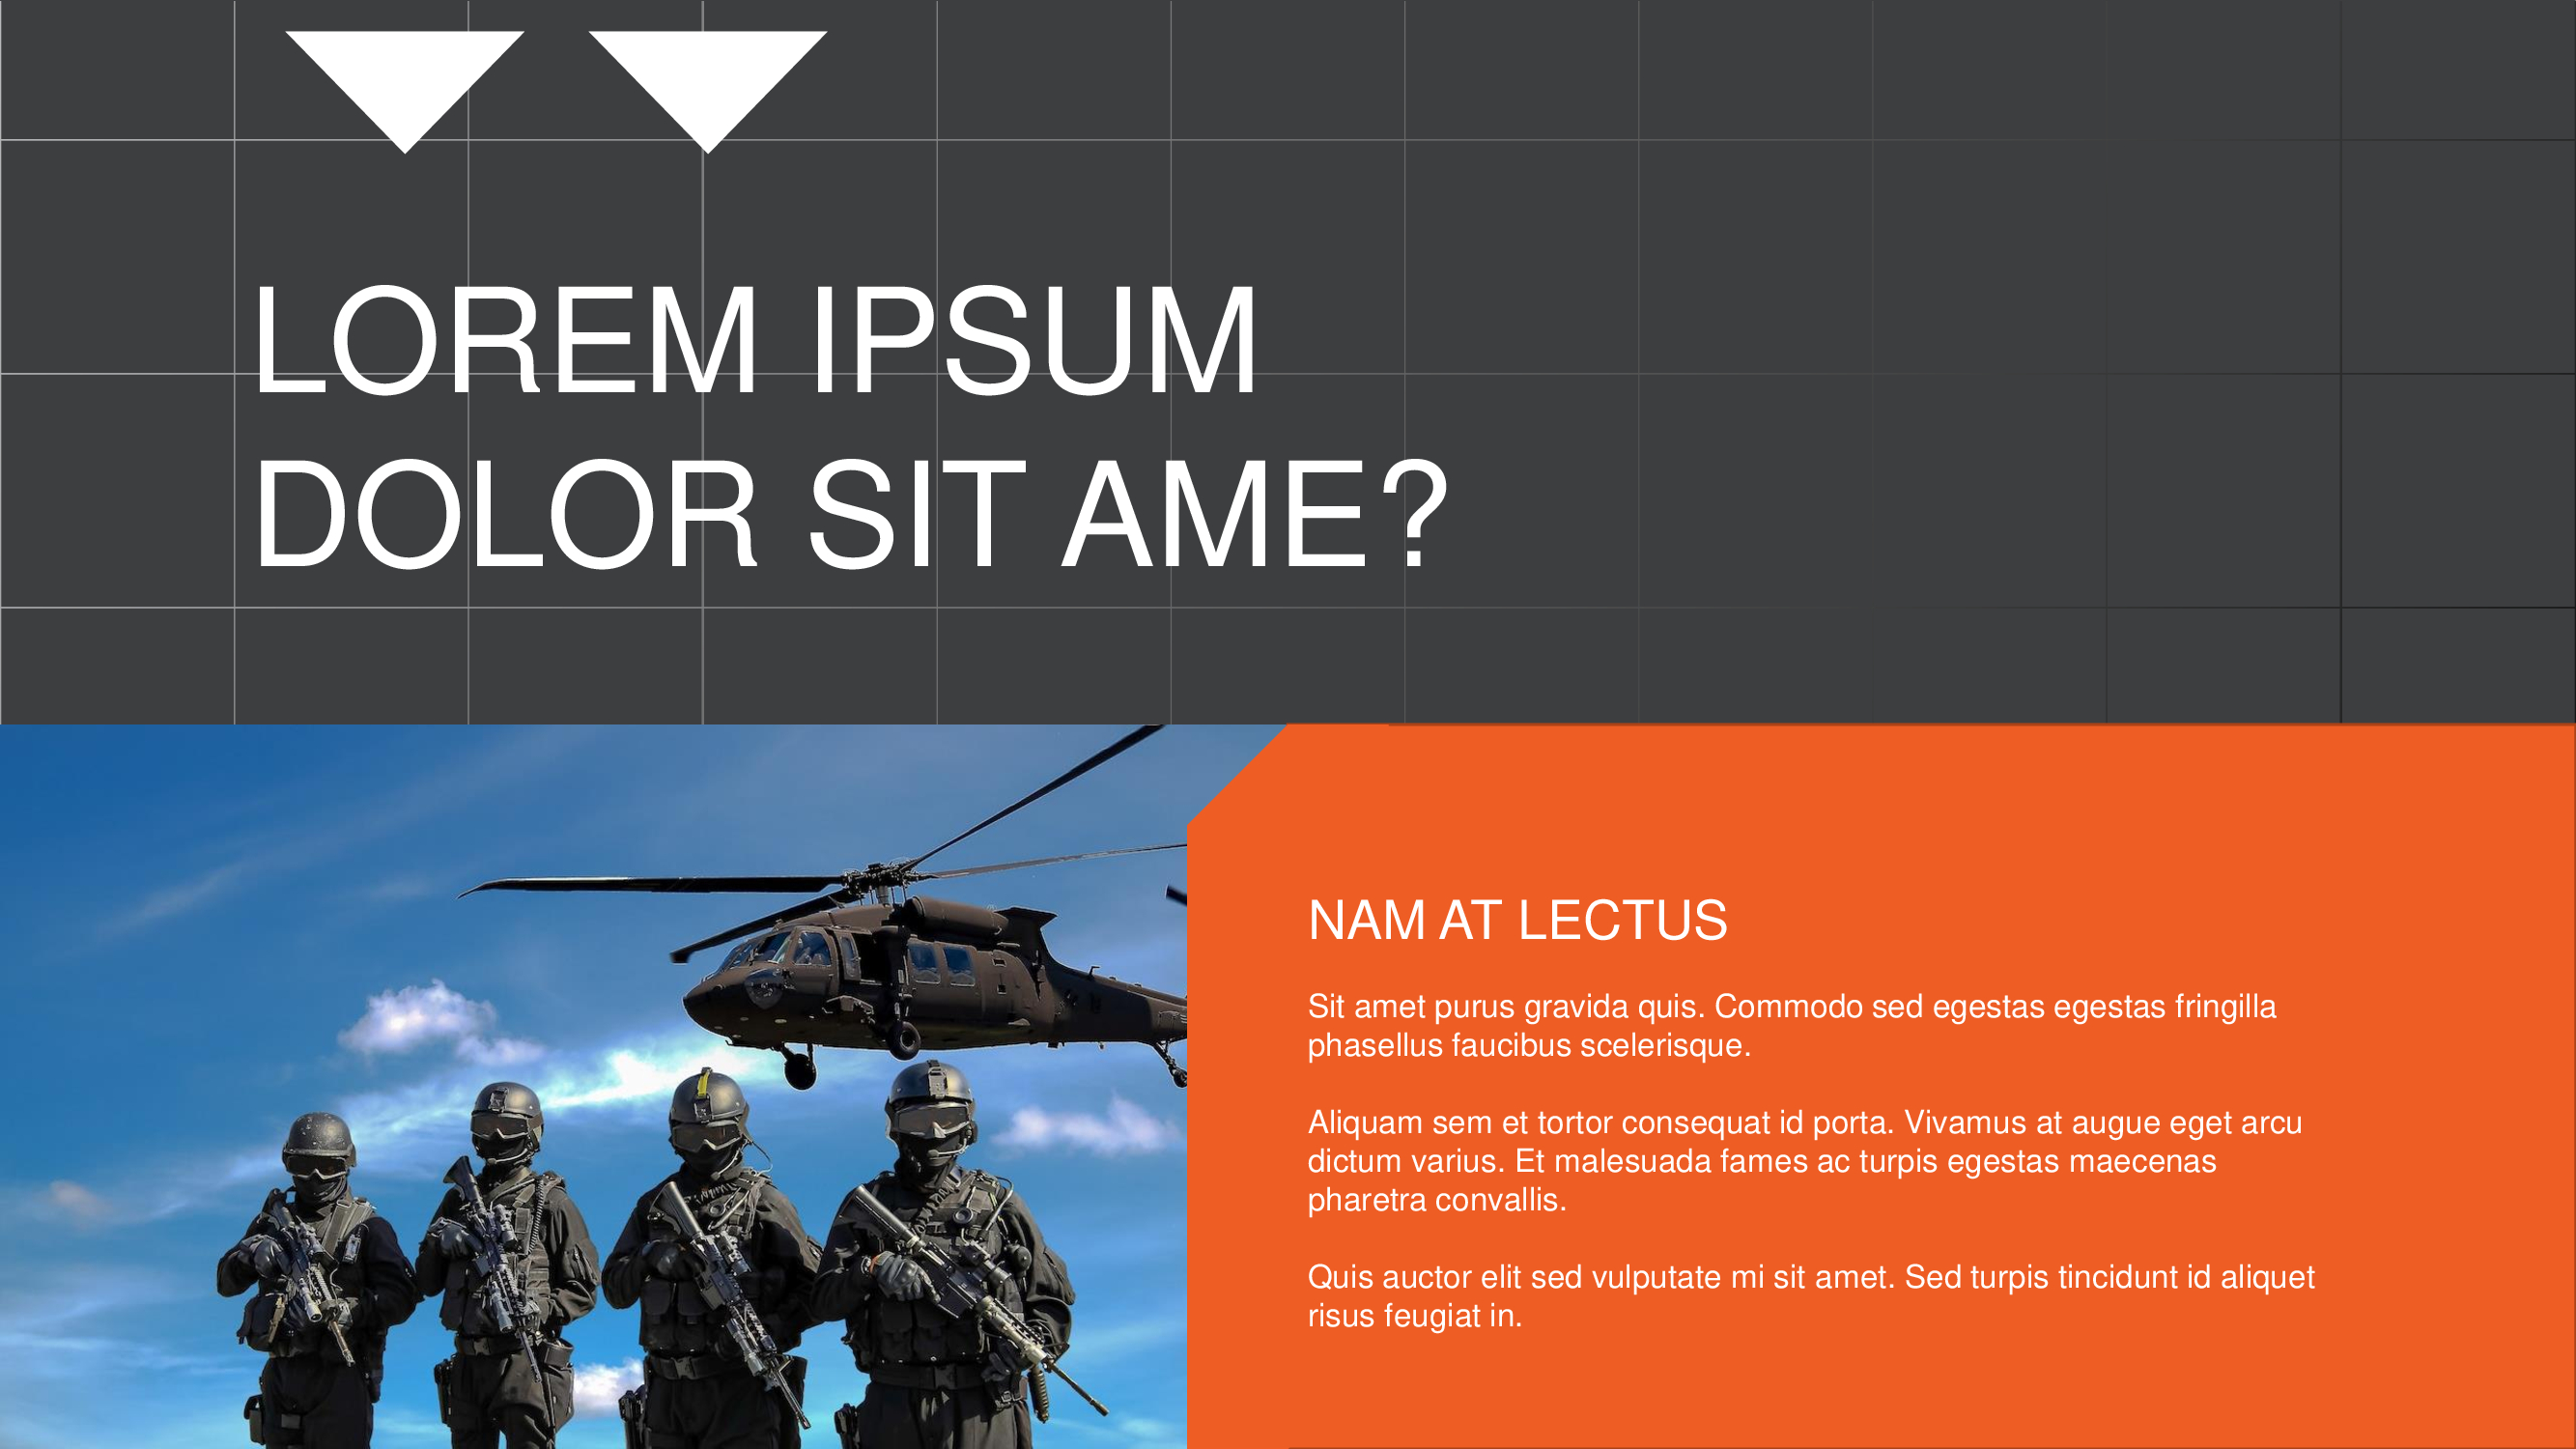 White lettering "Lorem ipsum dolor sit ame?" and picture of army on a gray background.